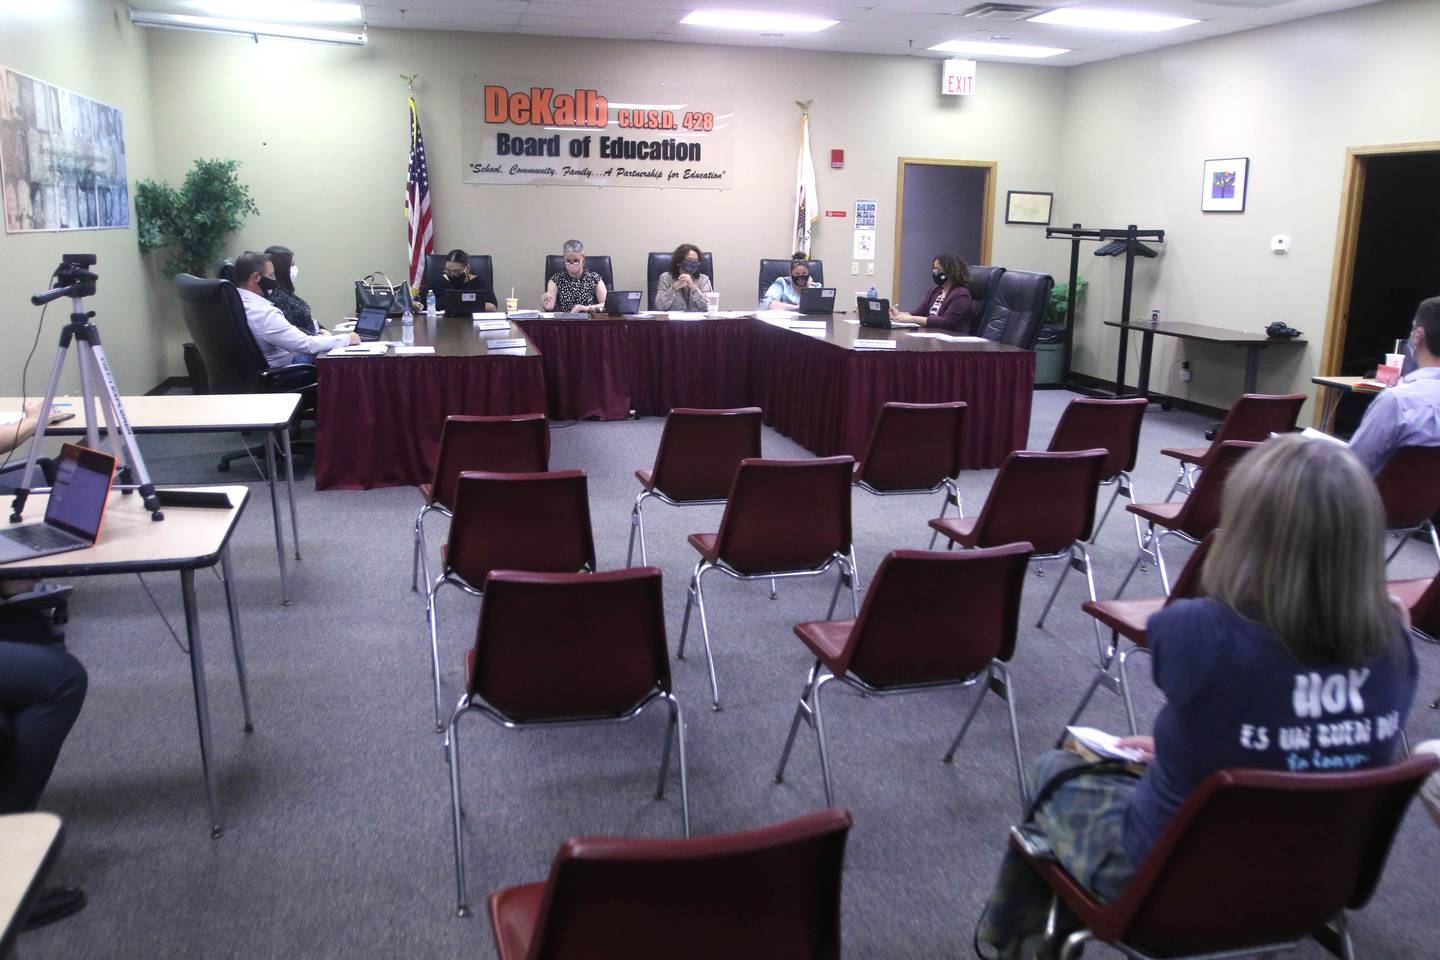 Attendance was sparse at the DeKalb School District 428 school board meeting at district offices Tuesday July 20, 2021, where there was some discussion on the boards upcoming decision on mask and COVID-19 policy as students prepare to return to school in the fall.